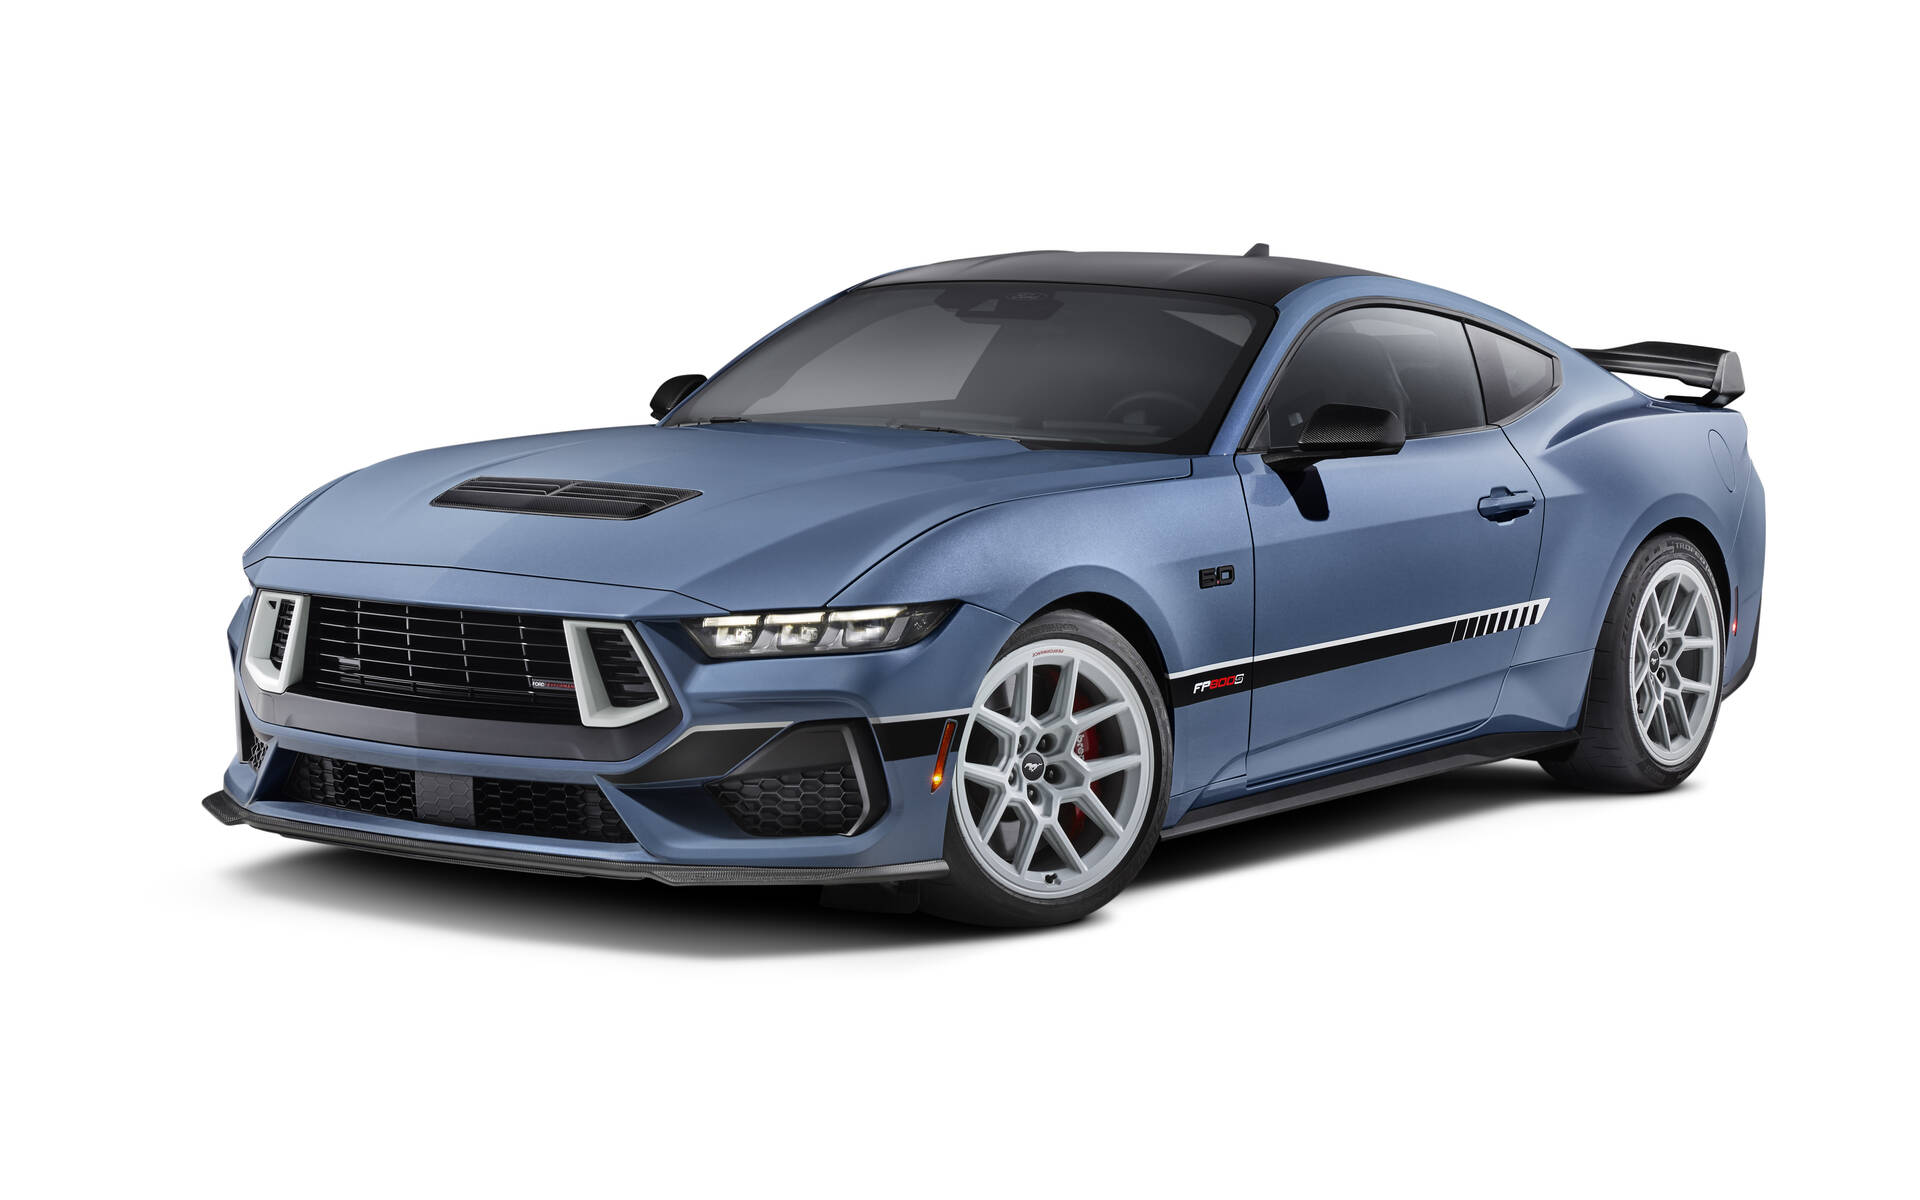 New Supercharger Kit Cranks Ford Mustang GT Up to 800+ Horsepower - The Car  Guide